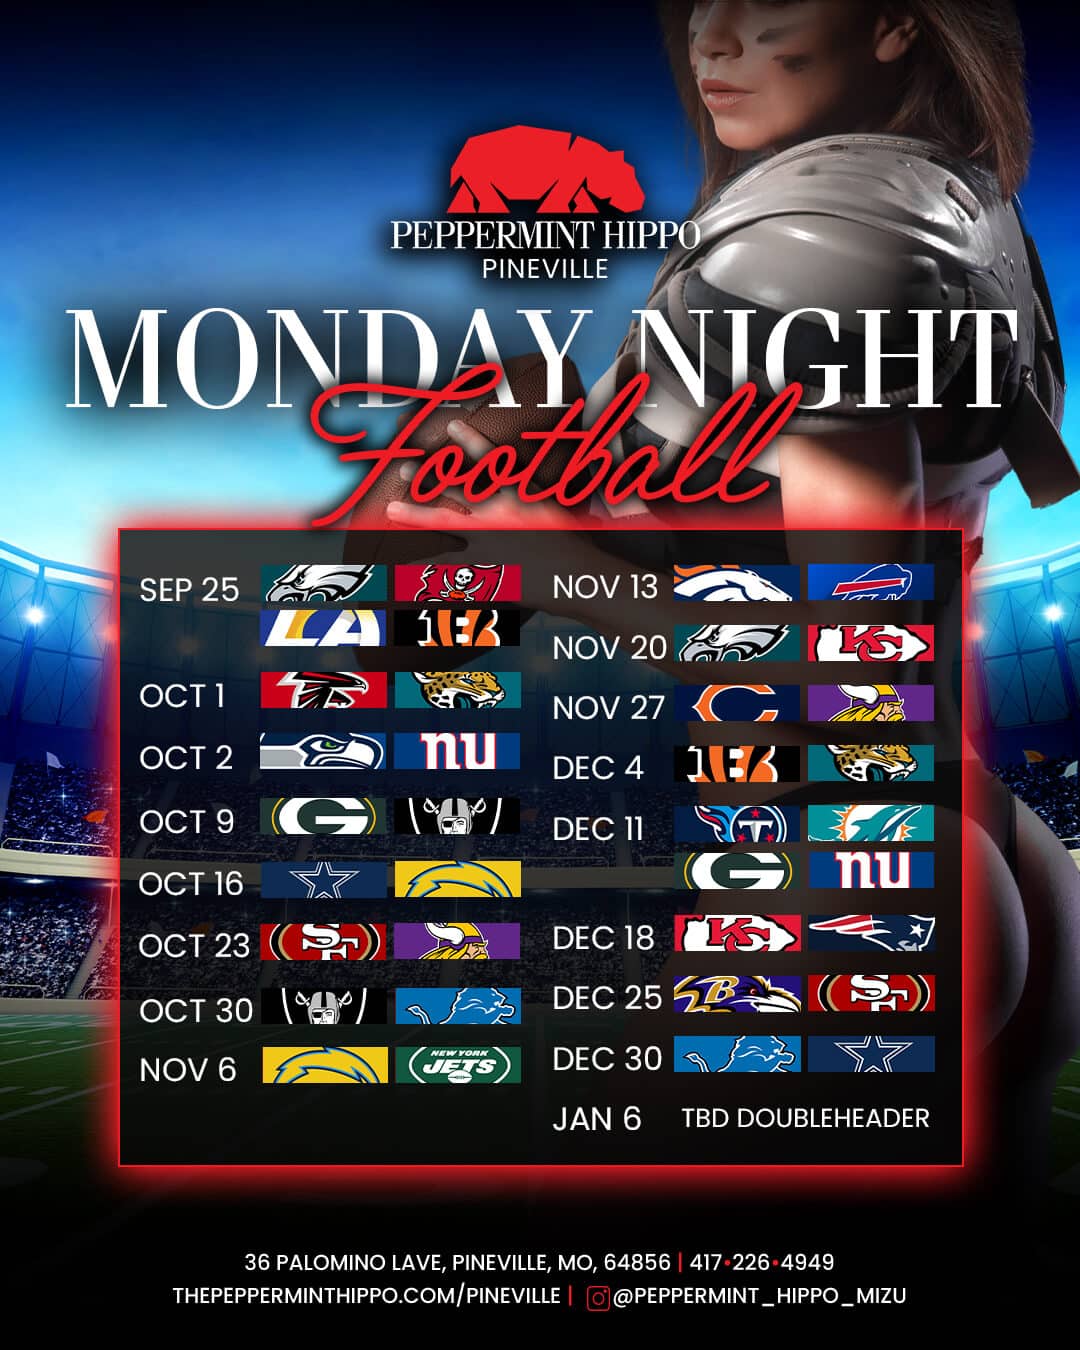 Monday Night Football at Peppermint Hippo Pineville